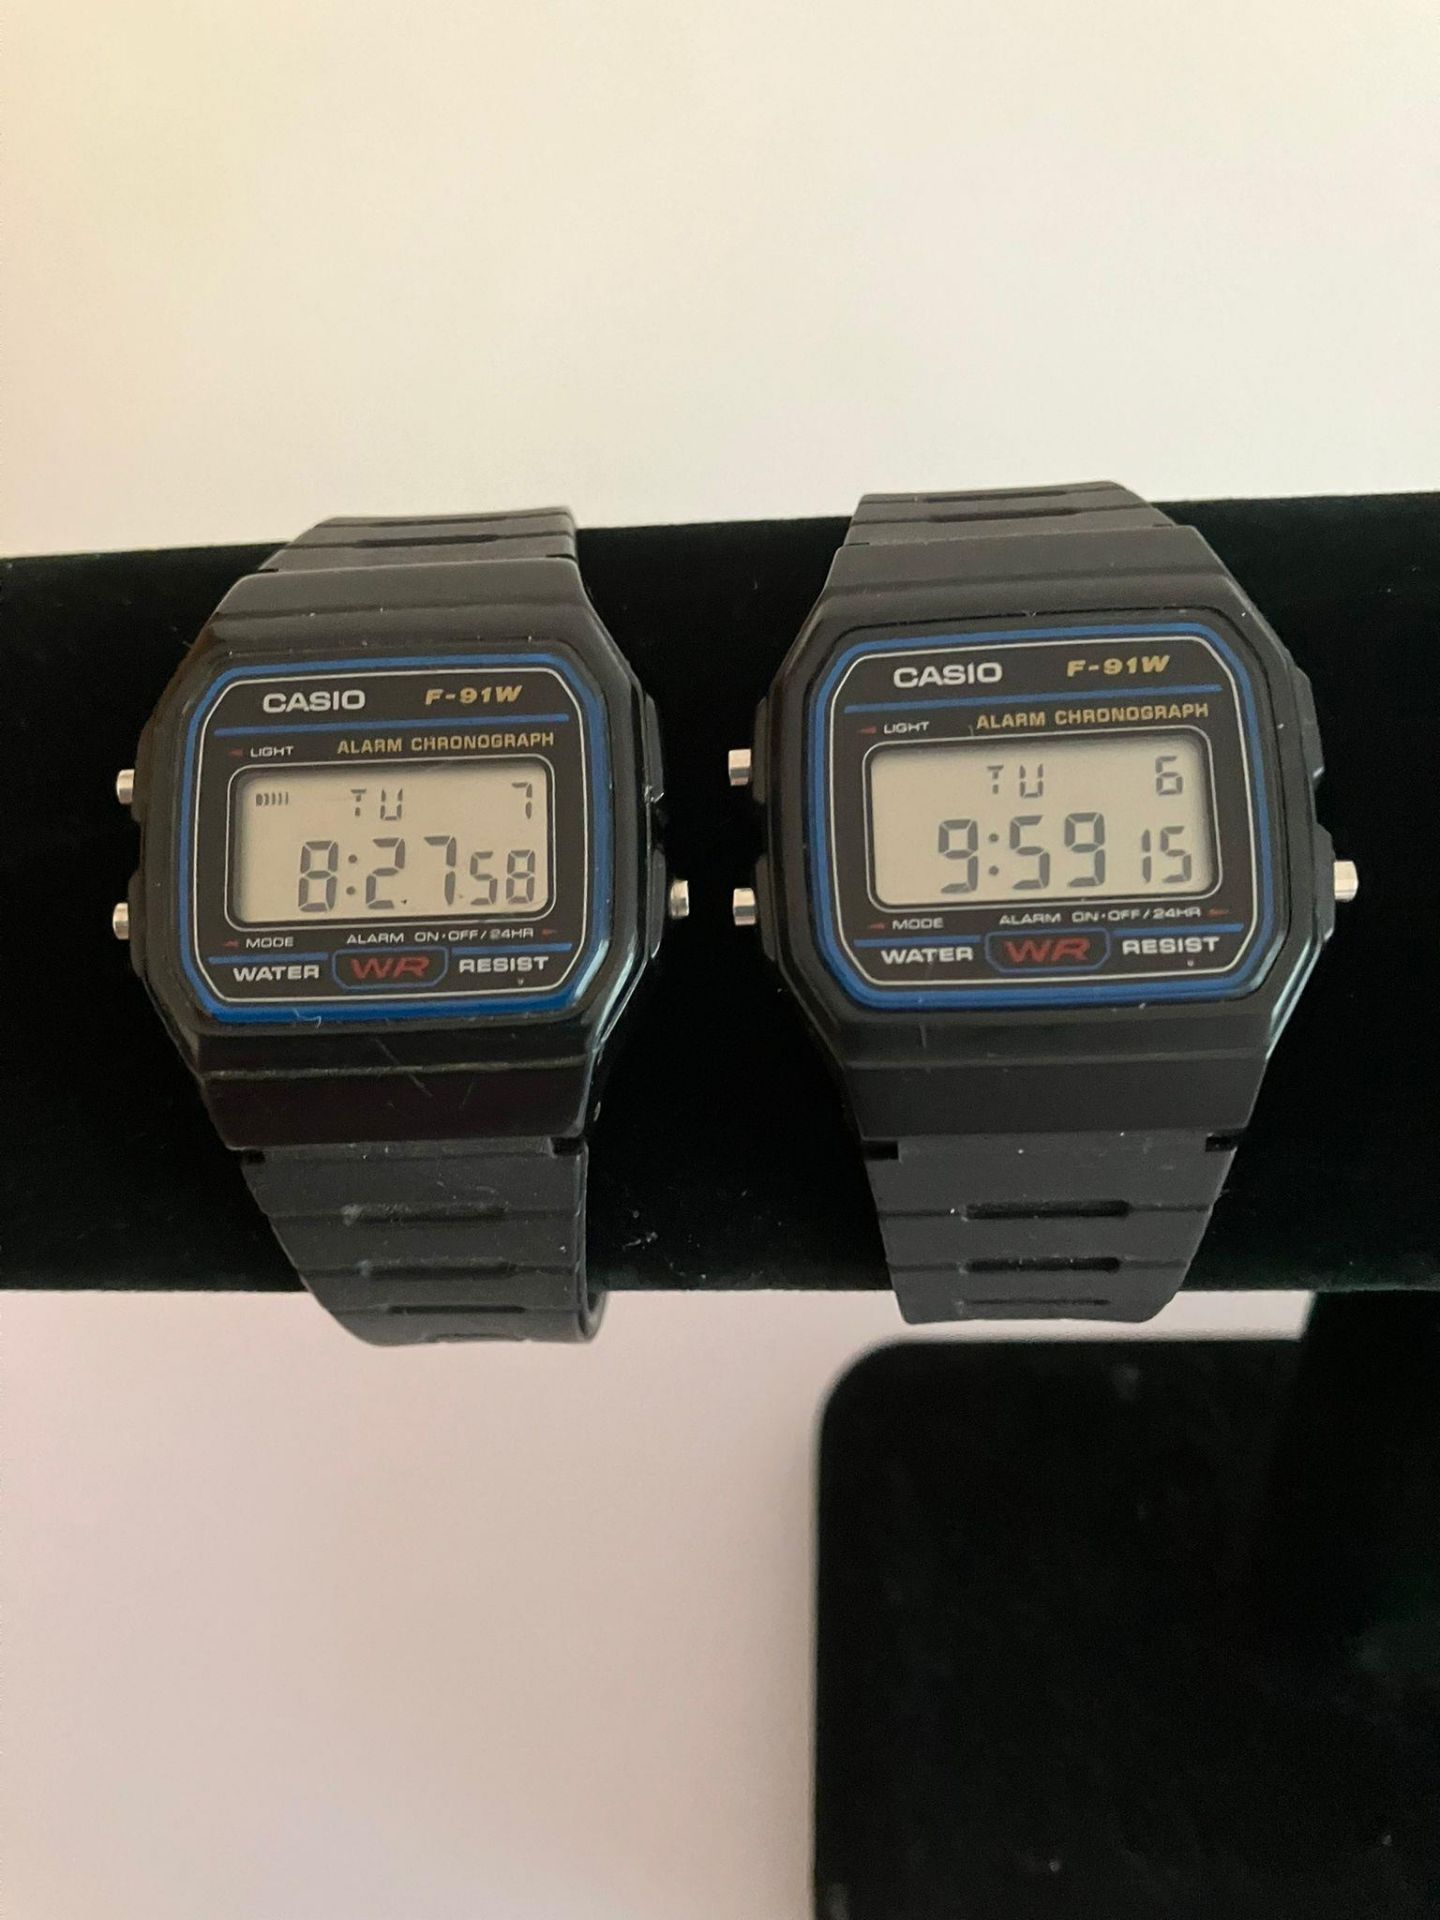 2 x CASIO DIGITAL f 91W Wristwatches. Water resistant with rubber diver straps. Full working order.